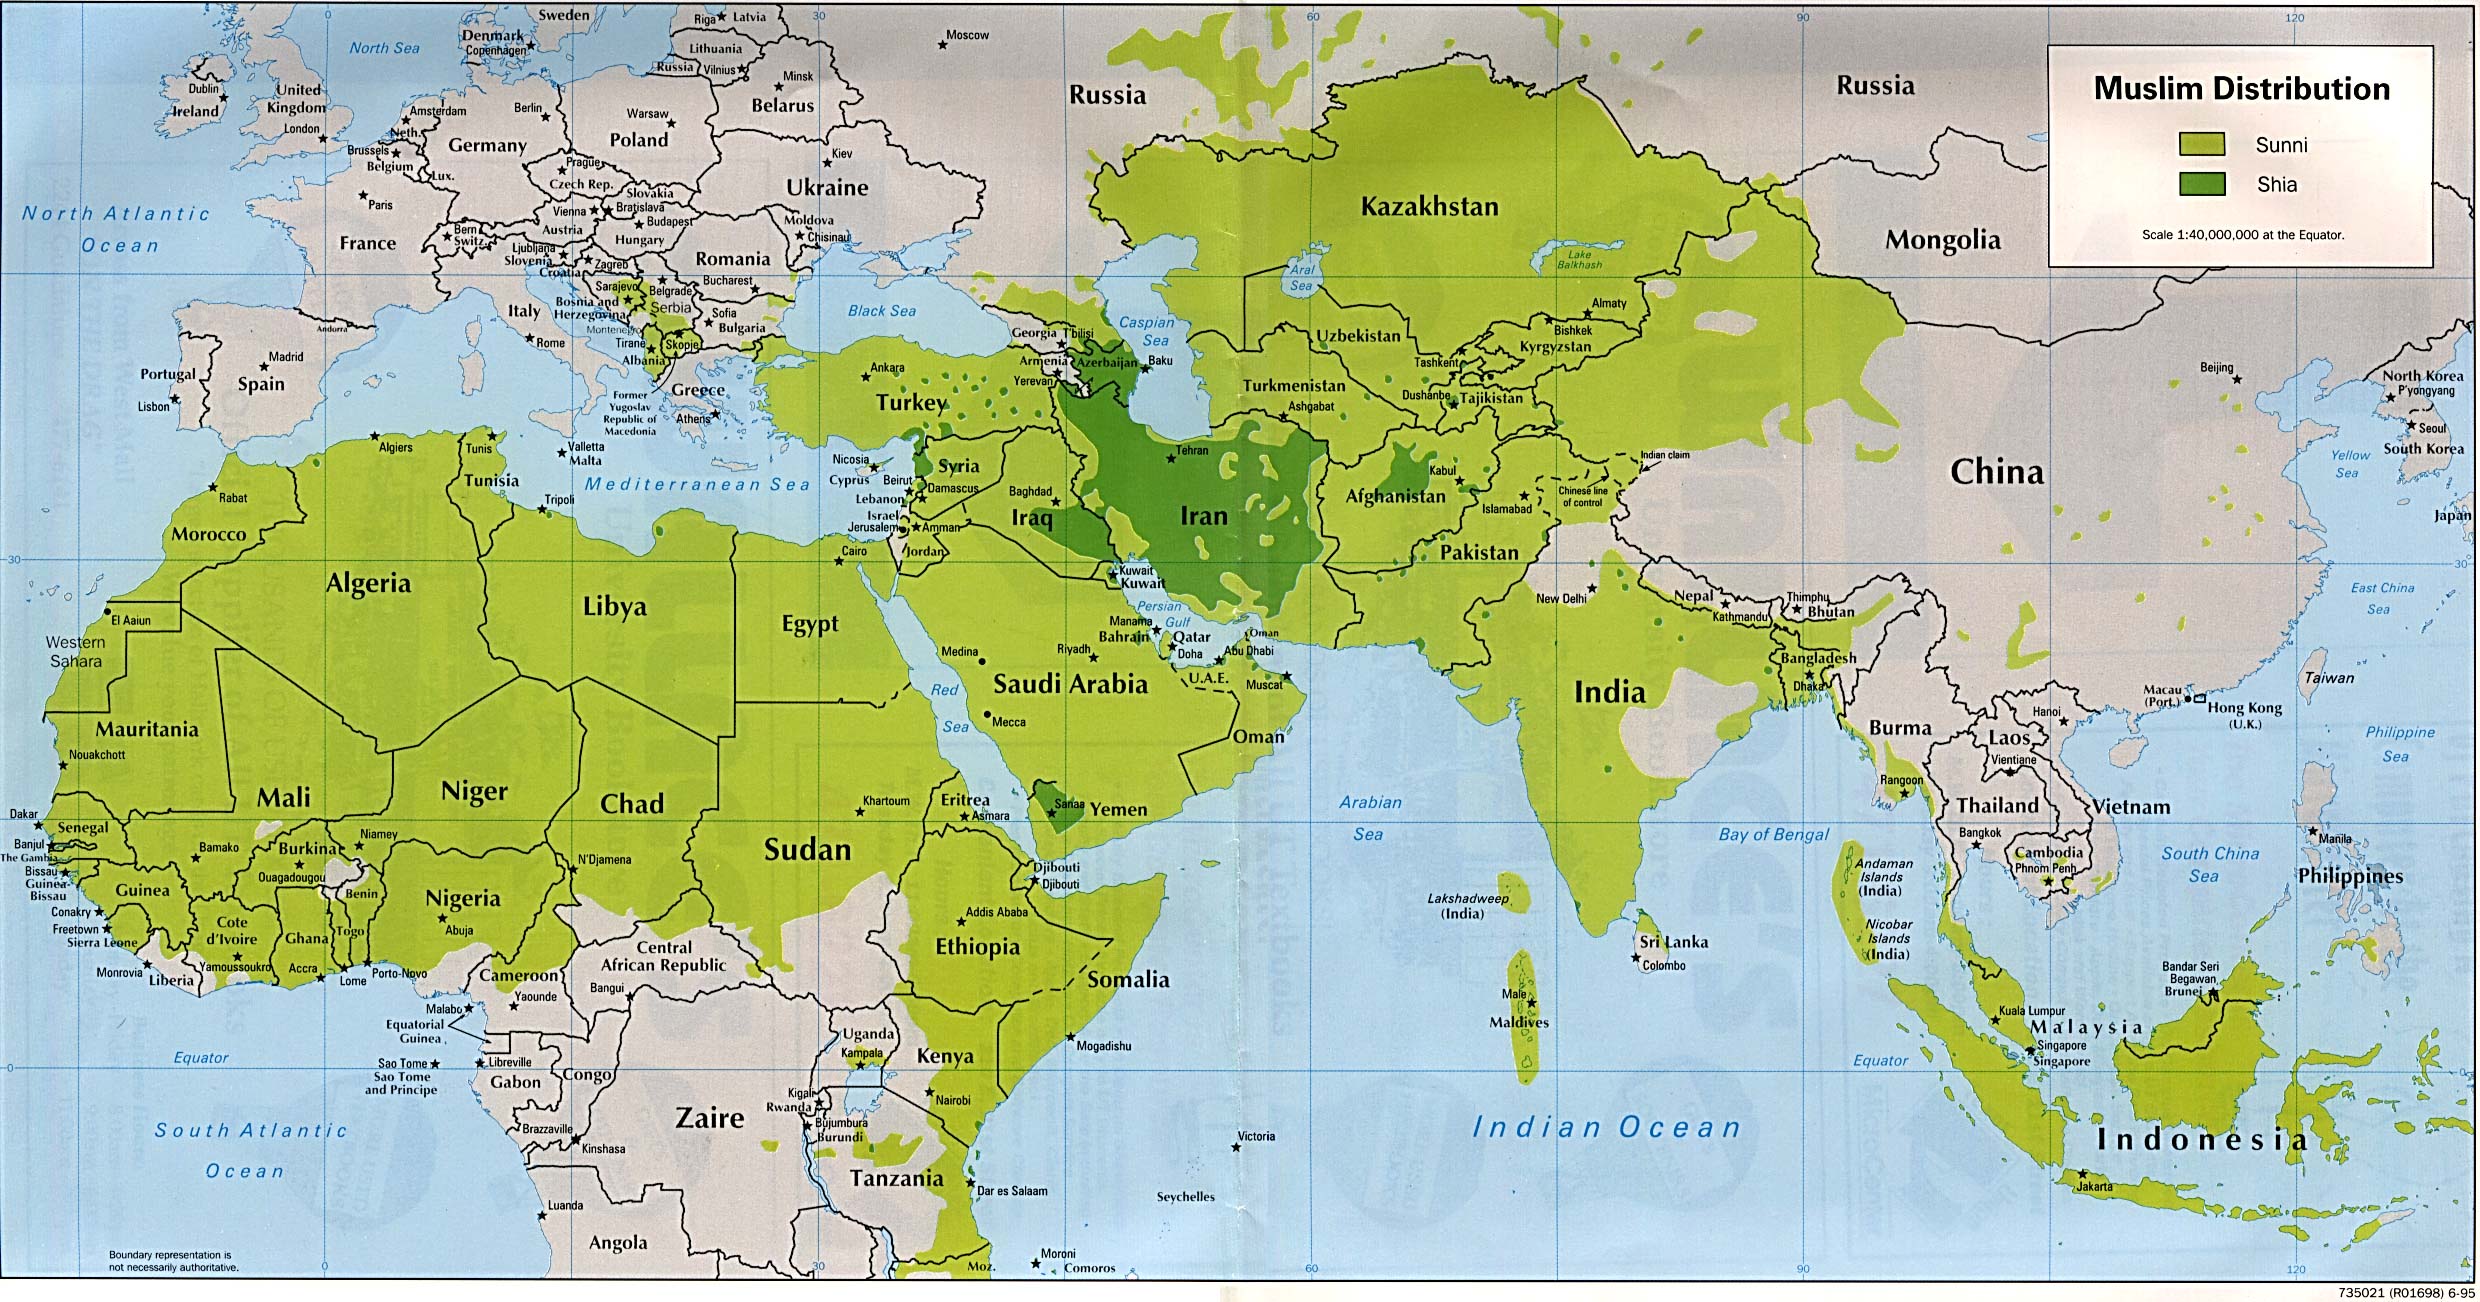 Sunni and Shiite Muslims in the World 1995 - Full size